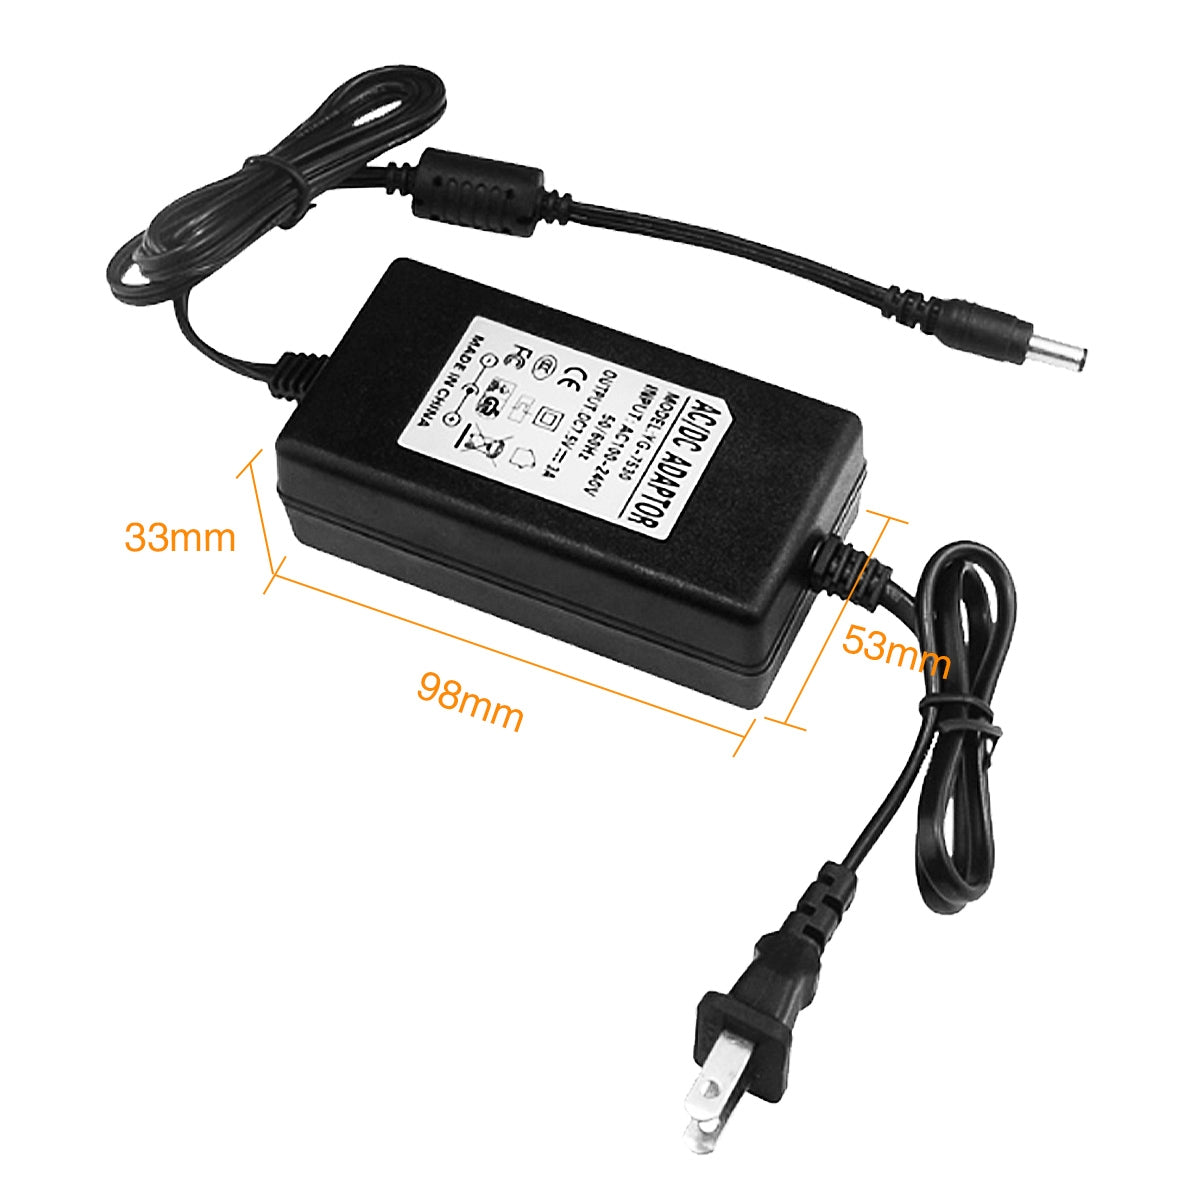 Power Supply Adapter for Robot Arm DC Plug 7.5V 3A